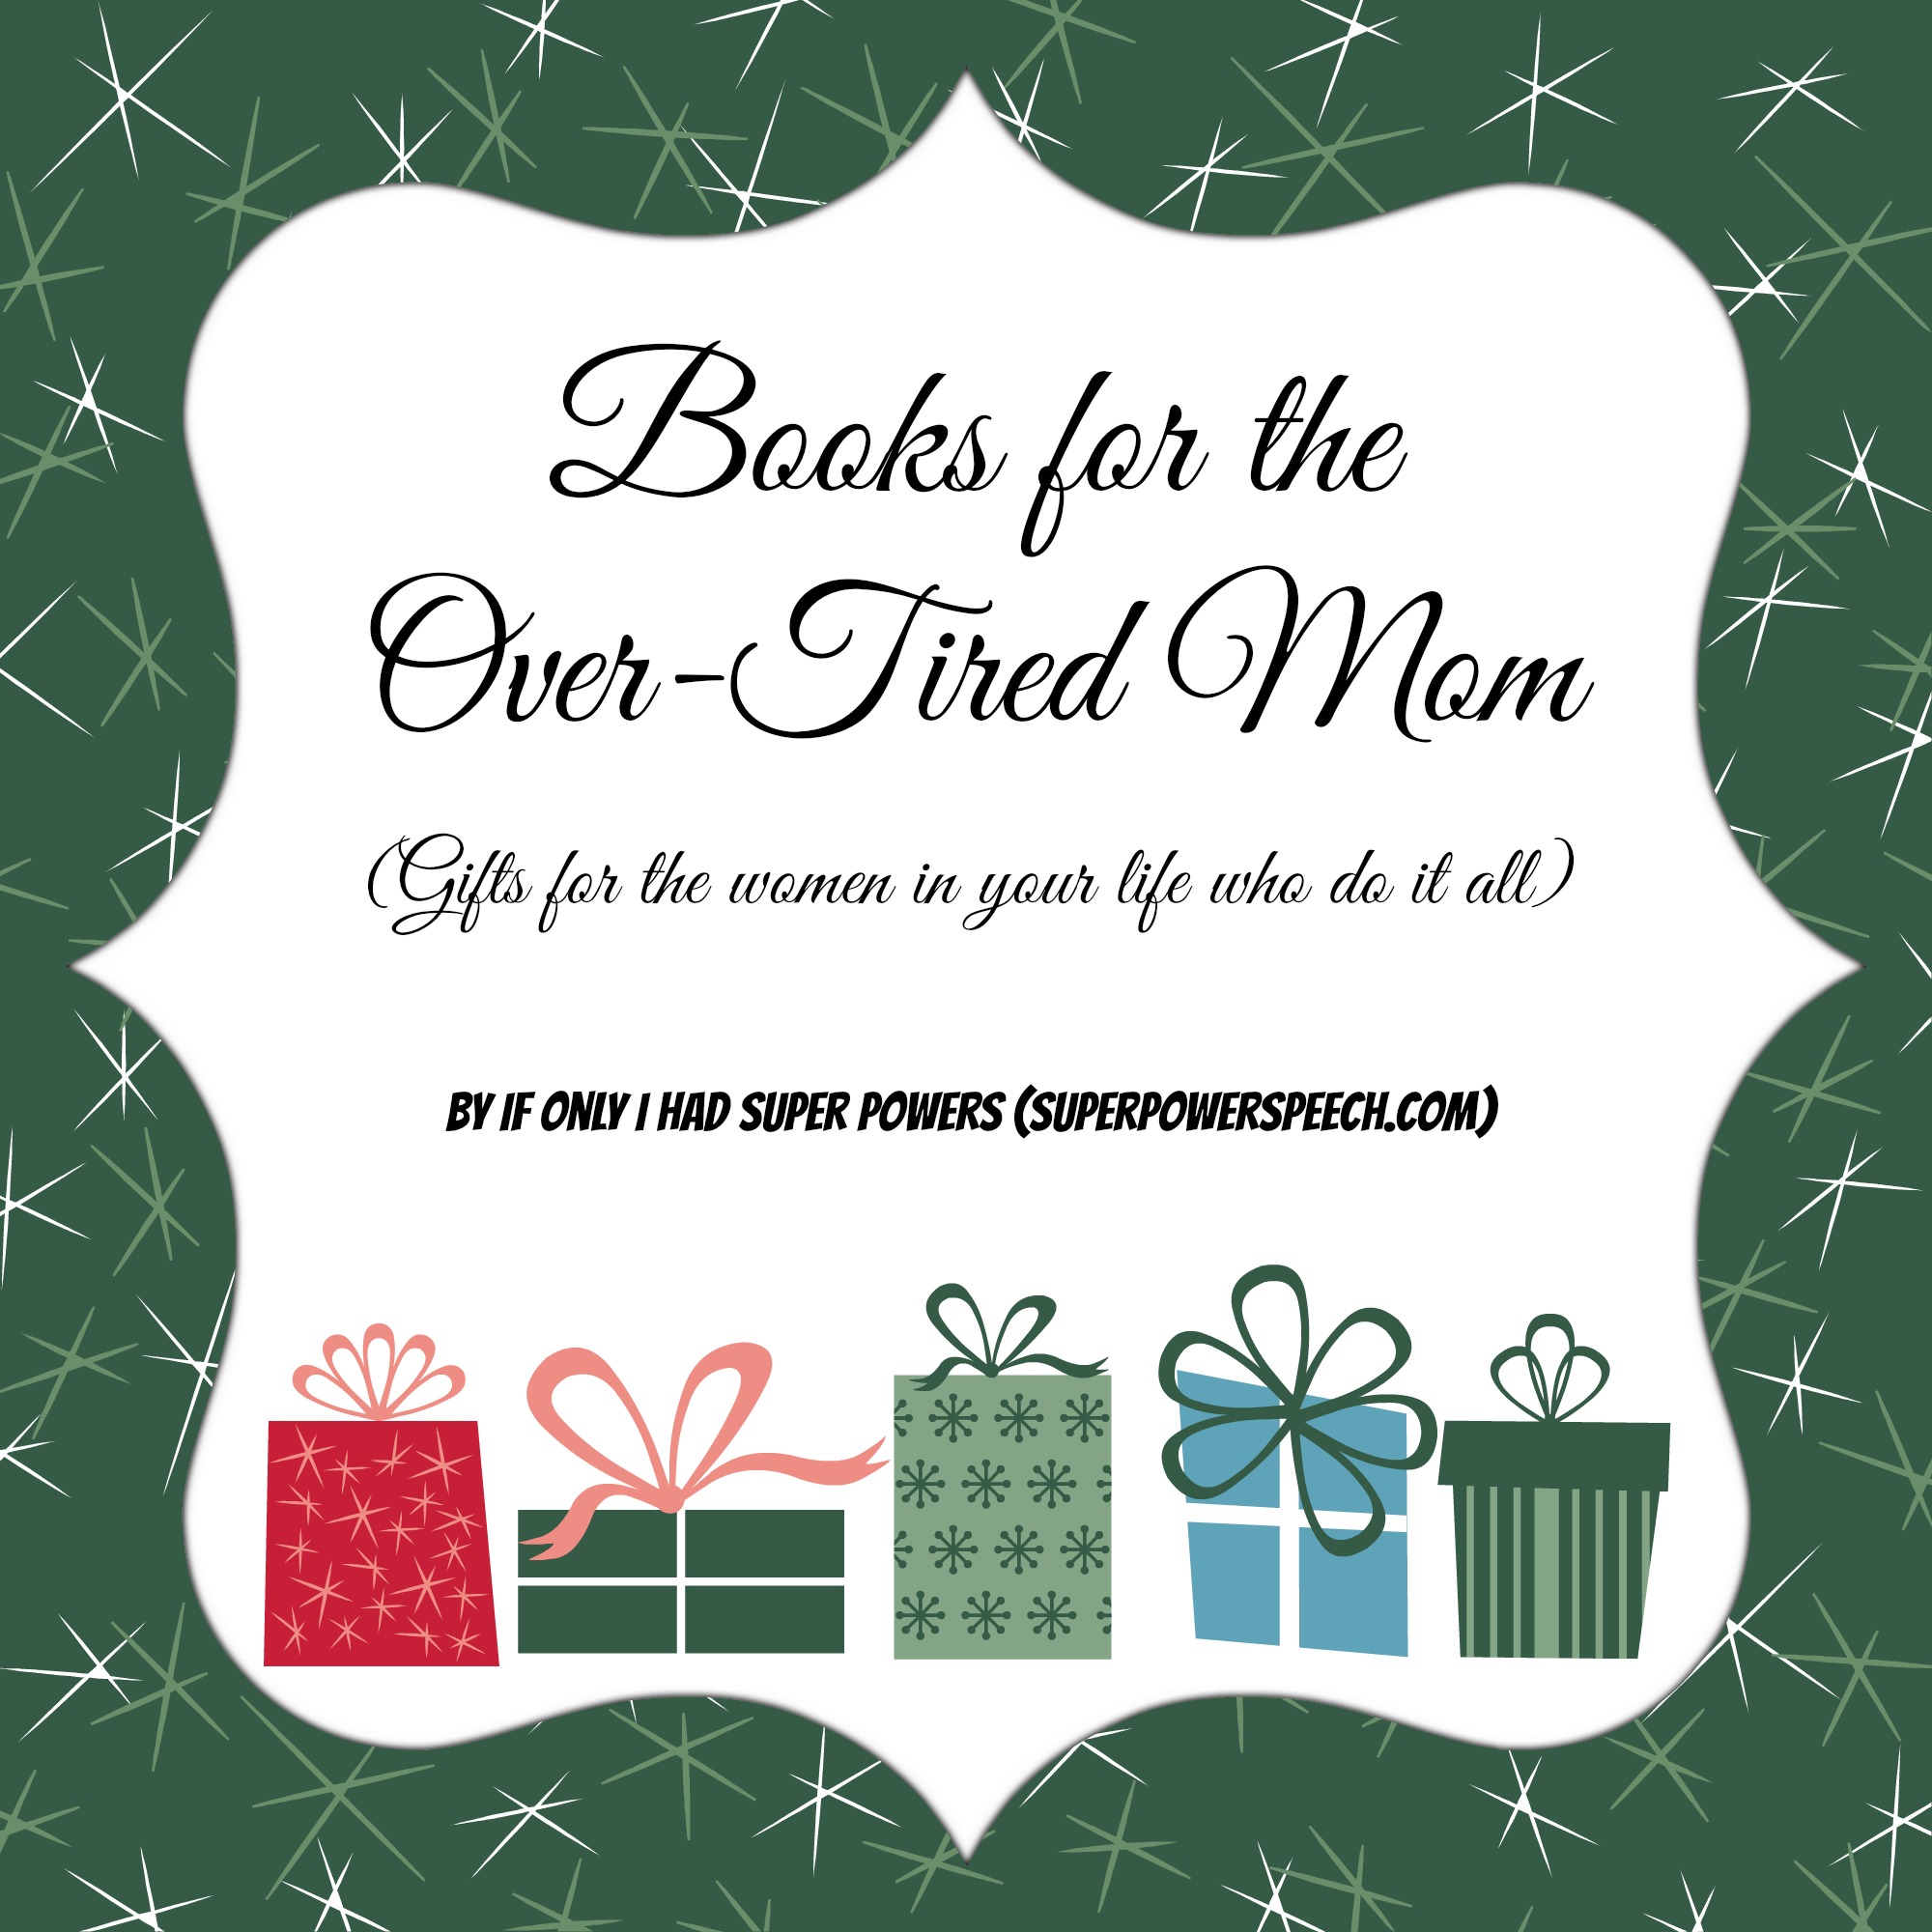 Books–the perfect gift for the over-busy mom!